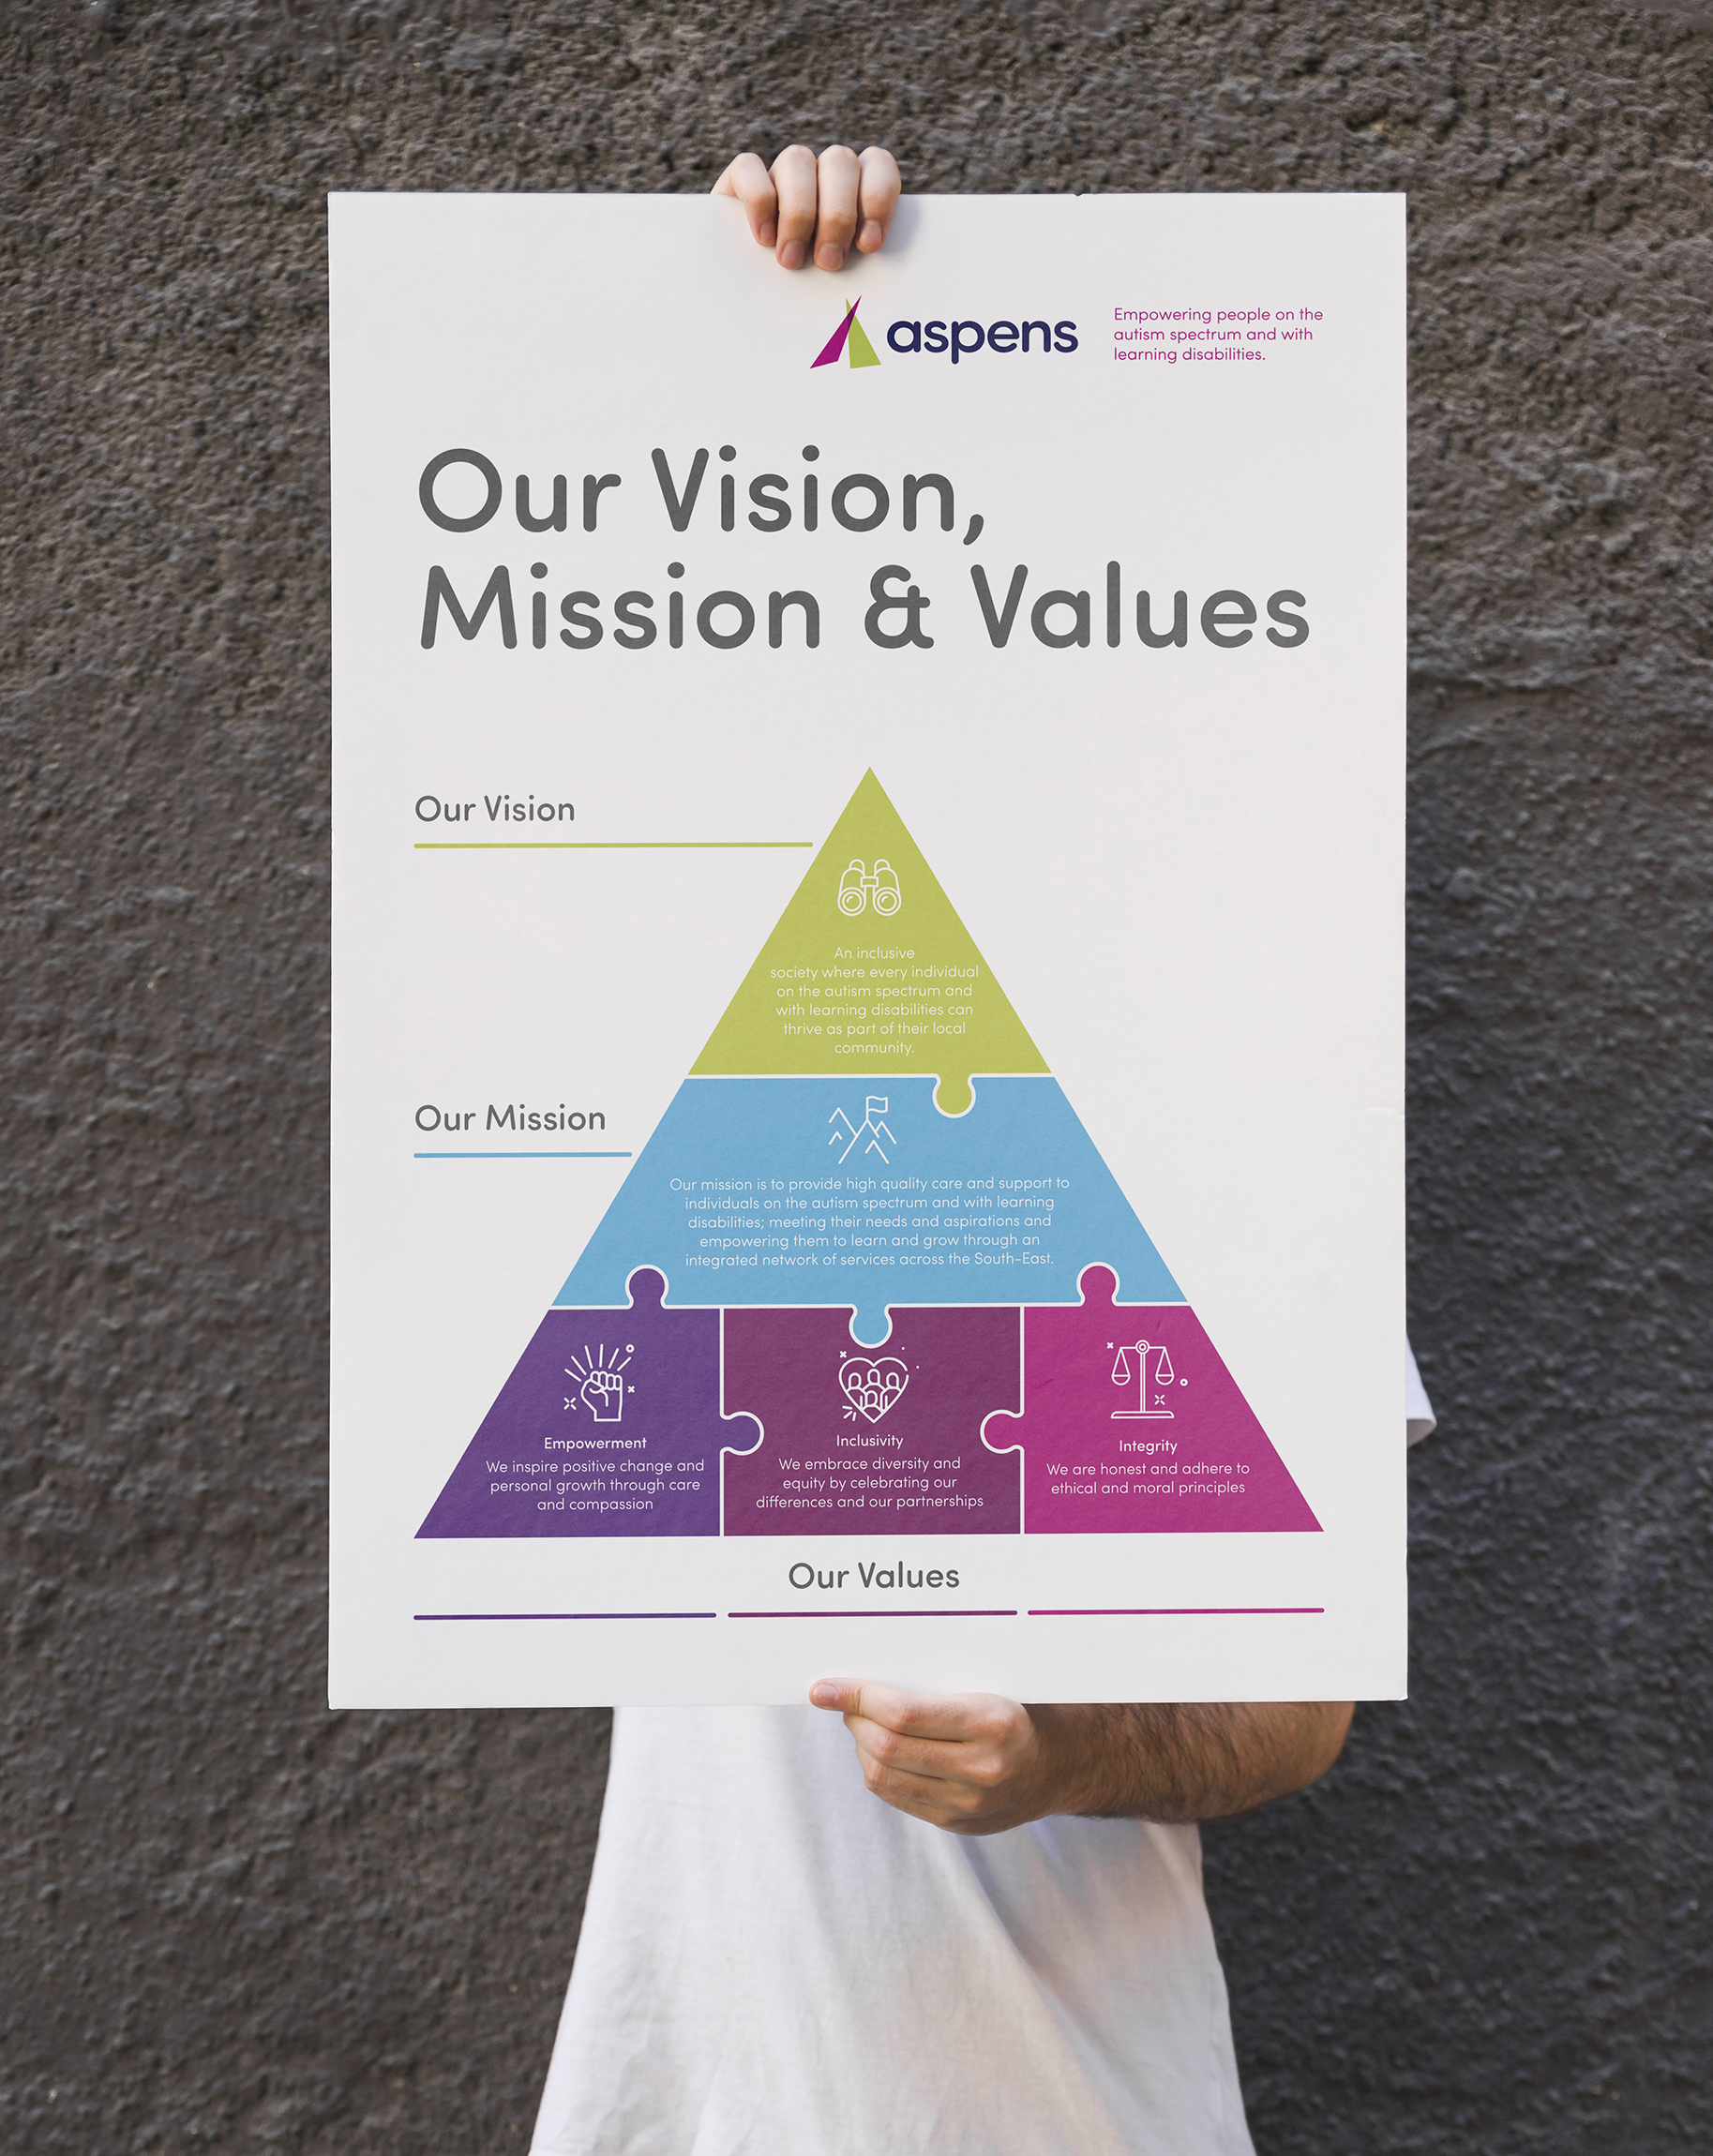 Aspens vision mission and values graphic poster